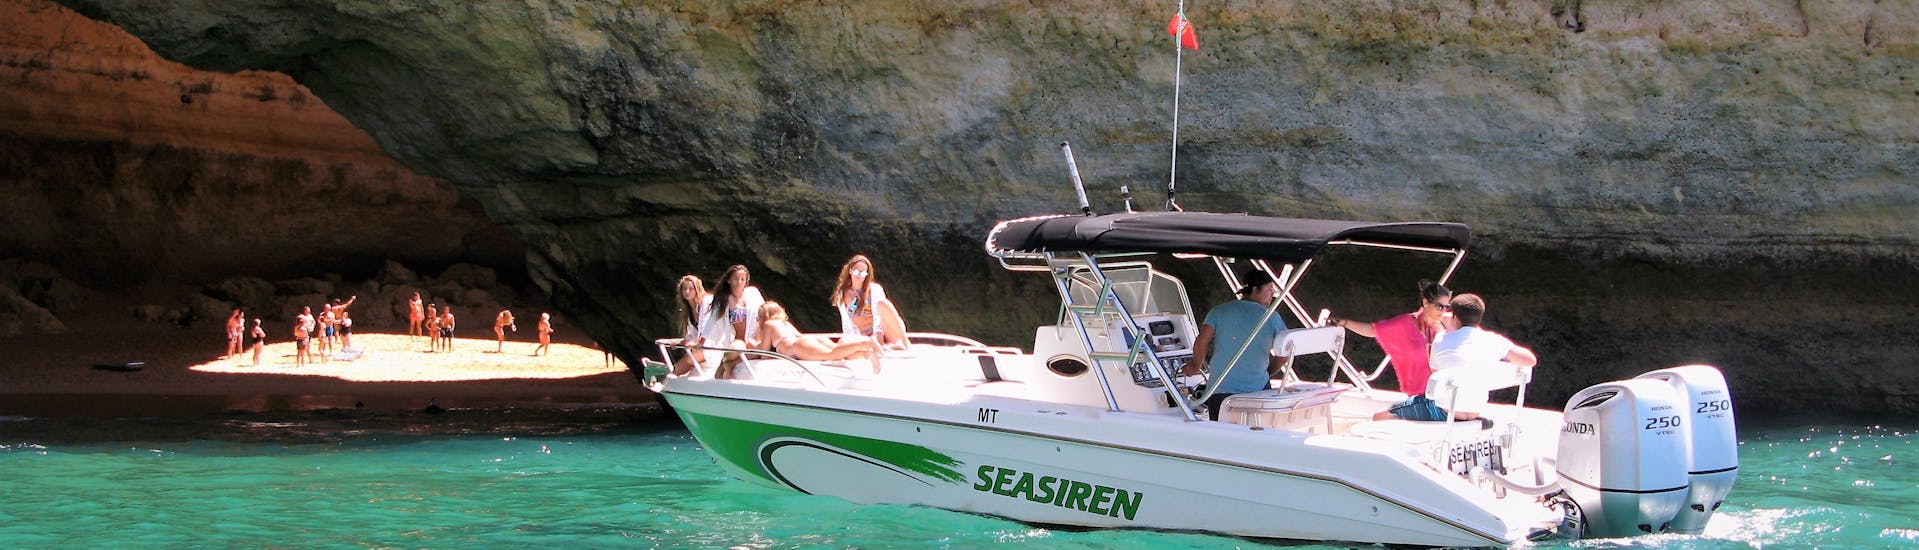 Boat cruising along the caves during the Private Boat Trip to Benagil Caves & Marinha Beach with Seasiren Tours Algarve.